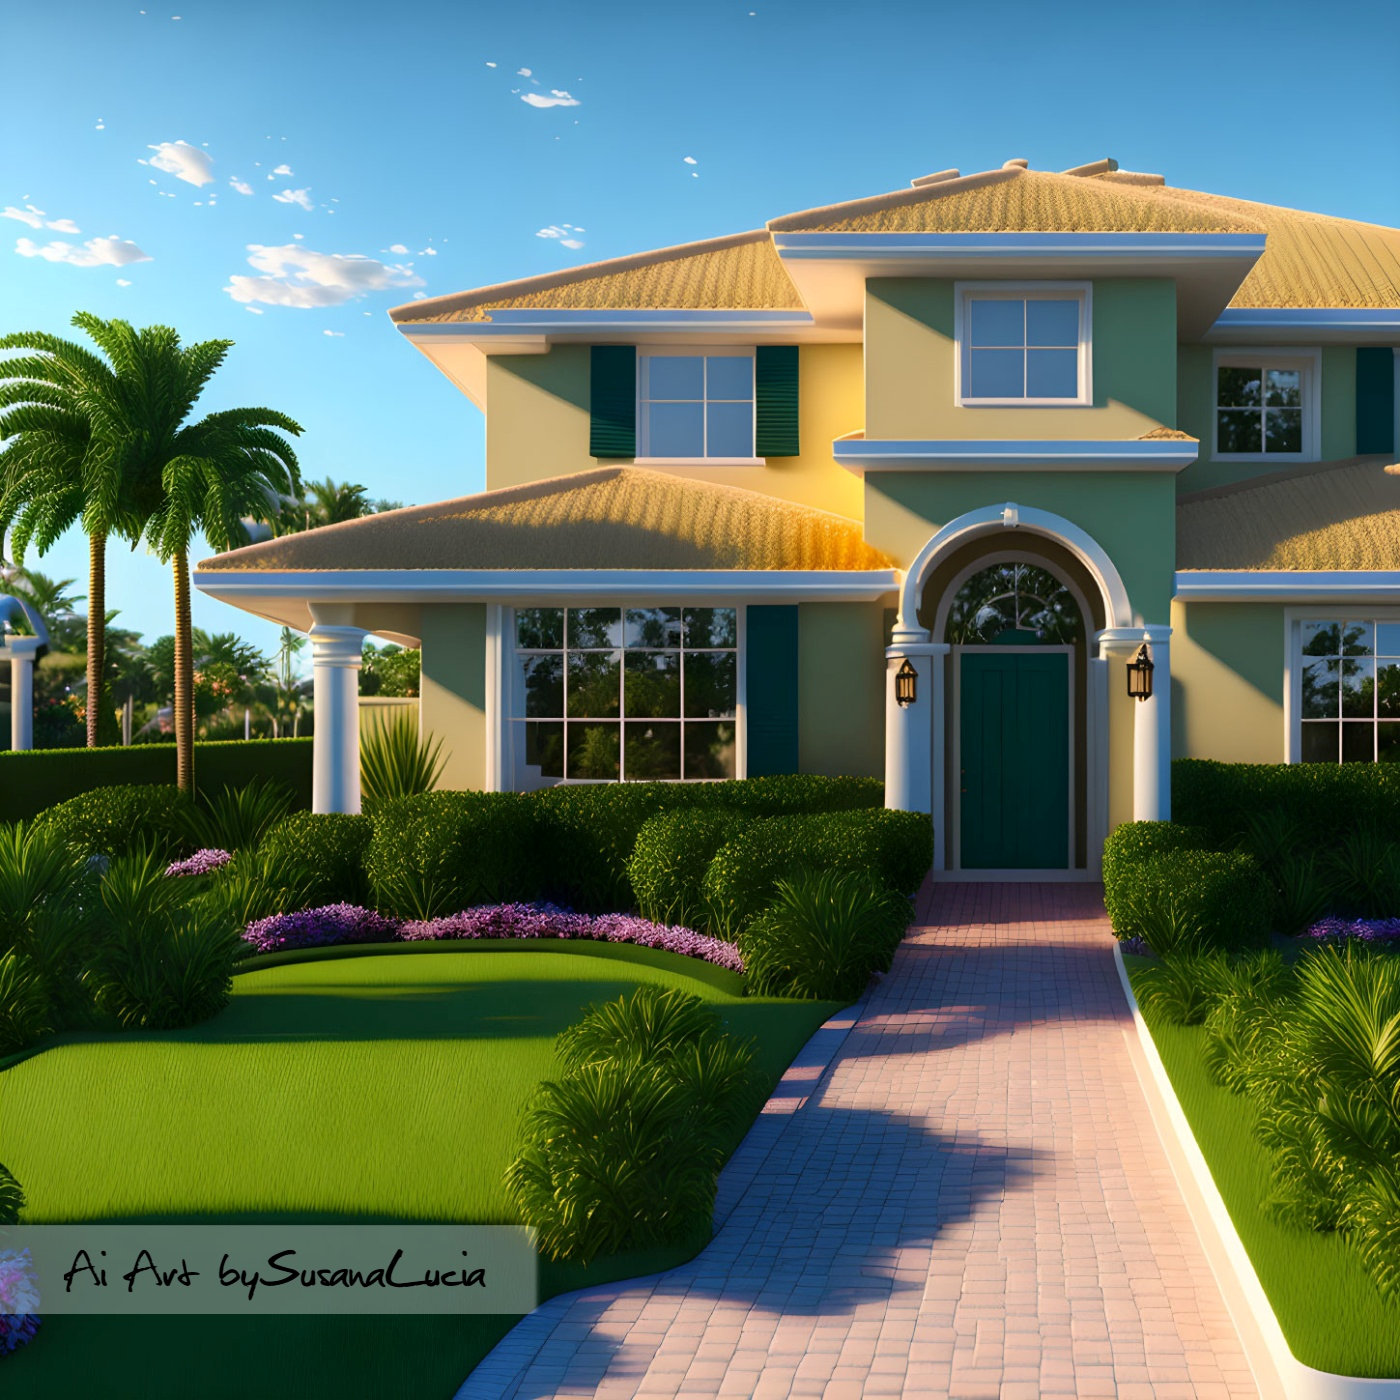 Florida-Sod-Suppliers-Landscaping-Sod-St-Augustine-Palmetto-Sod-Ai-Art-bySusanaLucia